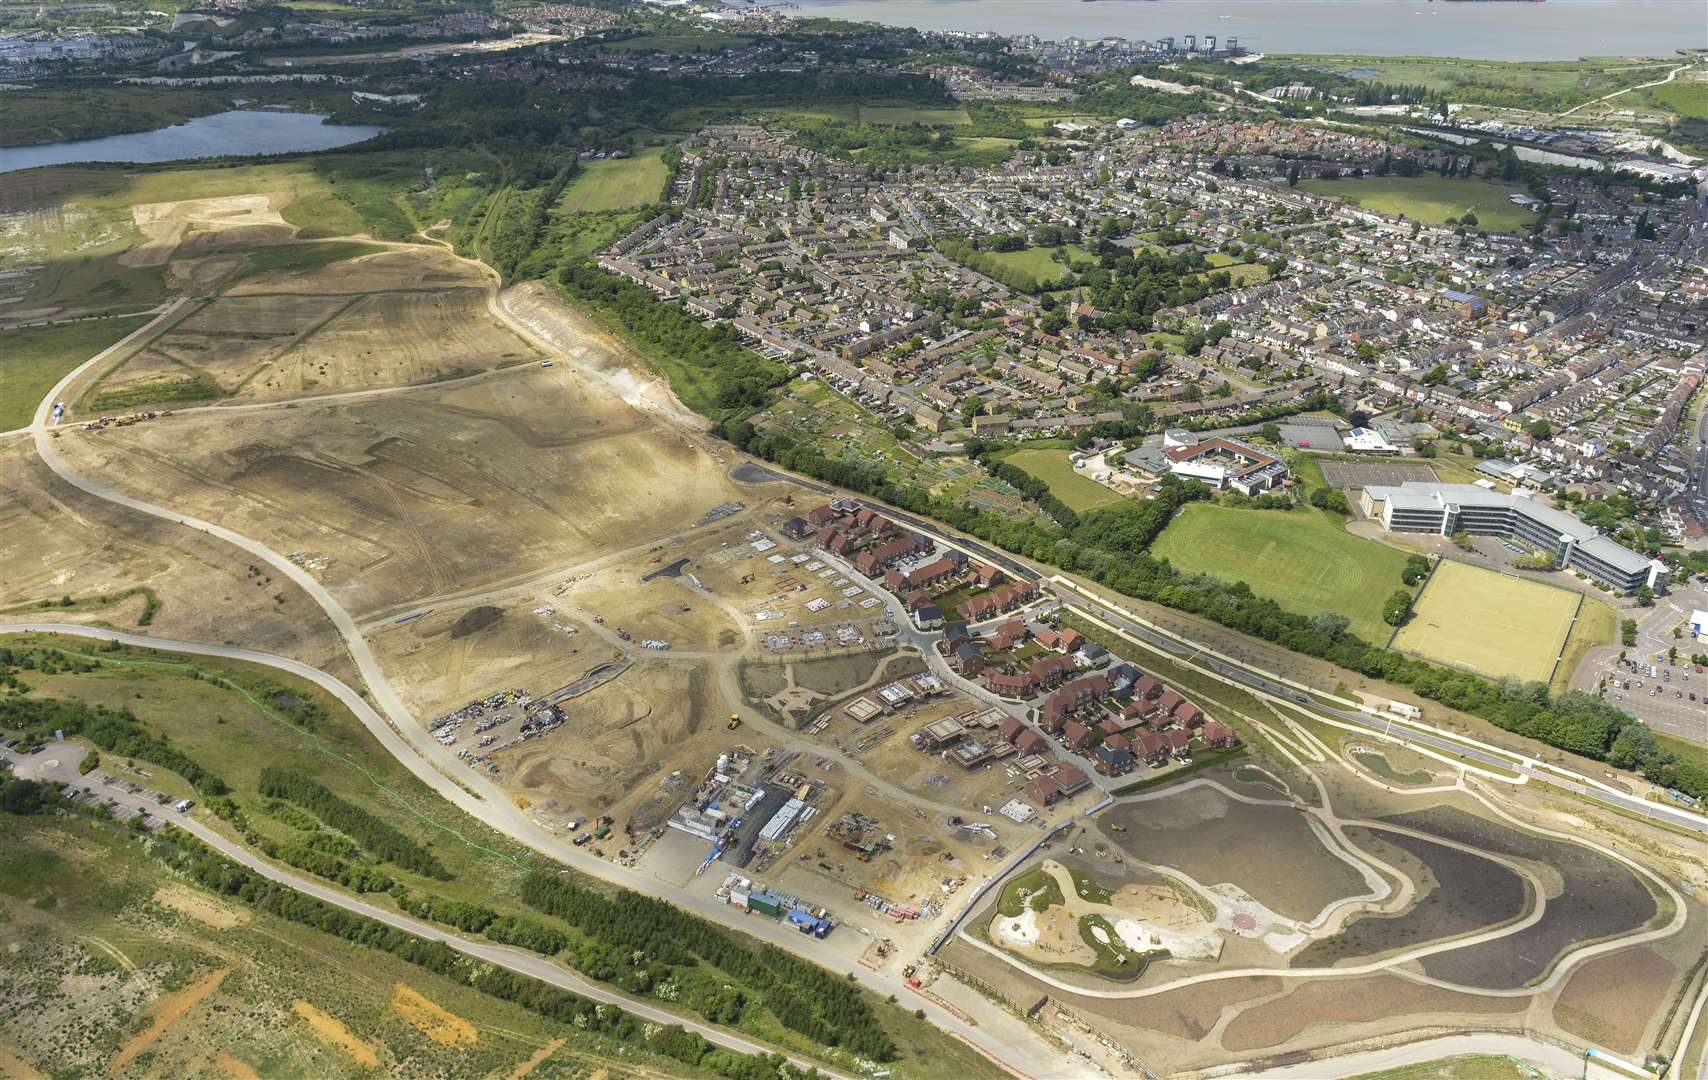 The Eastern Quarry where new homes, schools and amenities are being built at Ebbsfleet Garden City